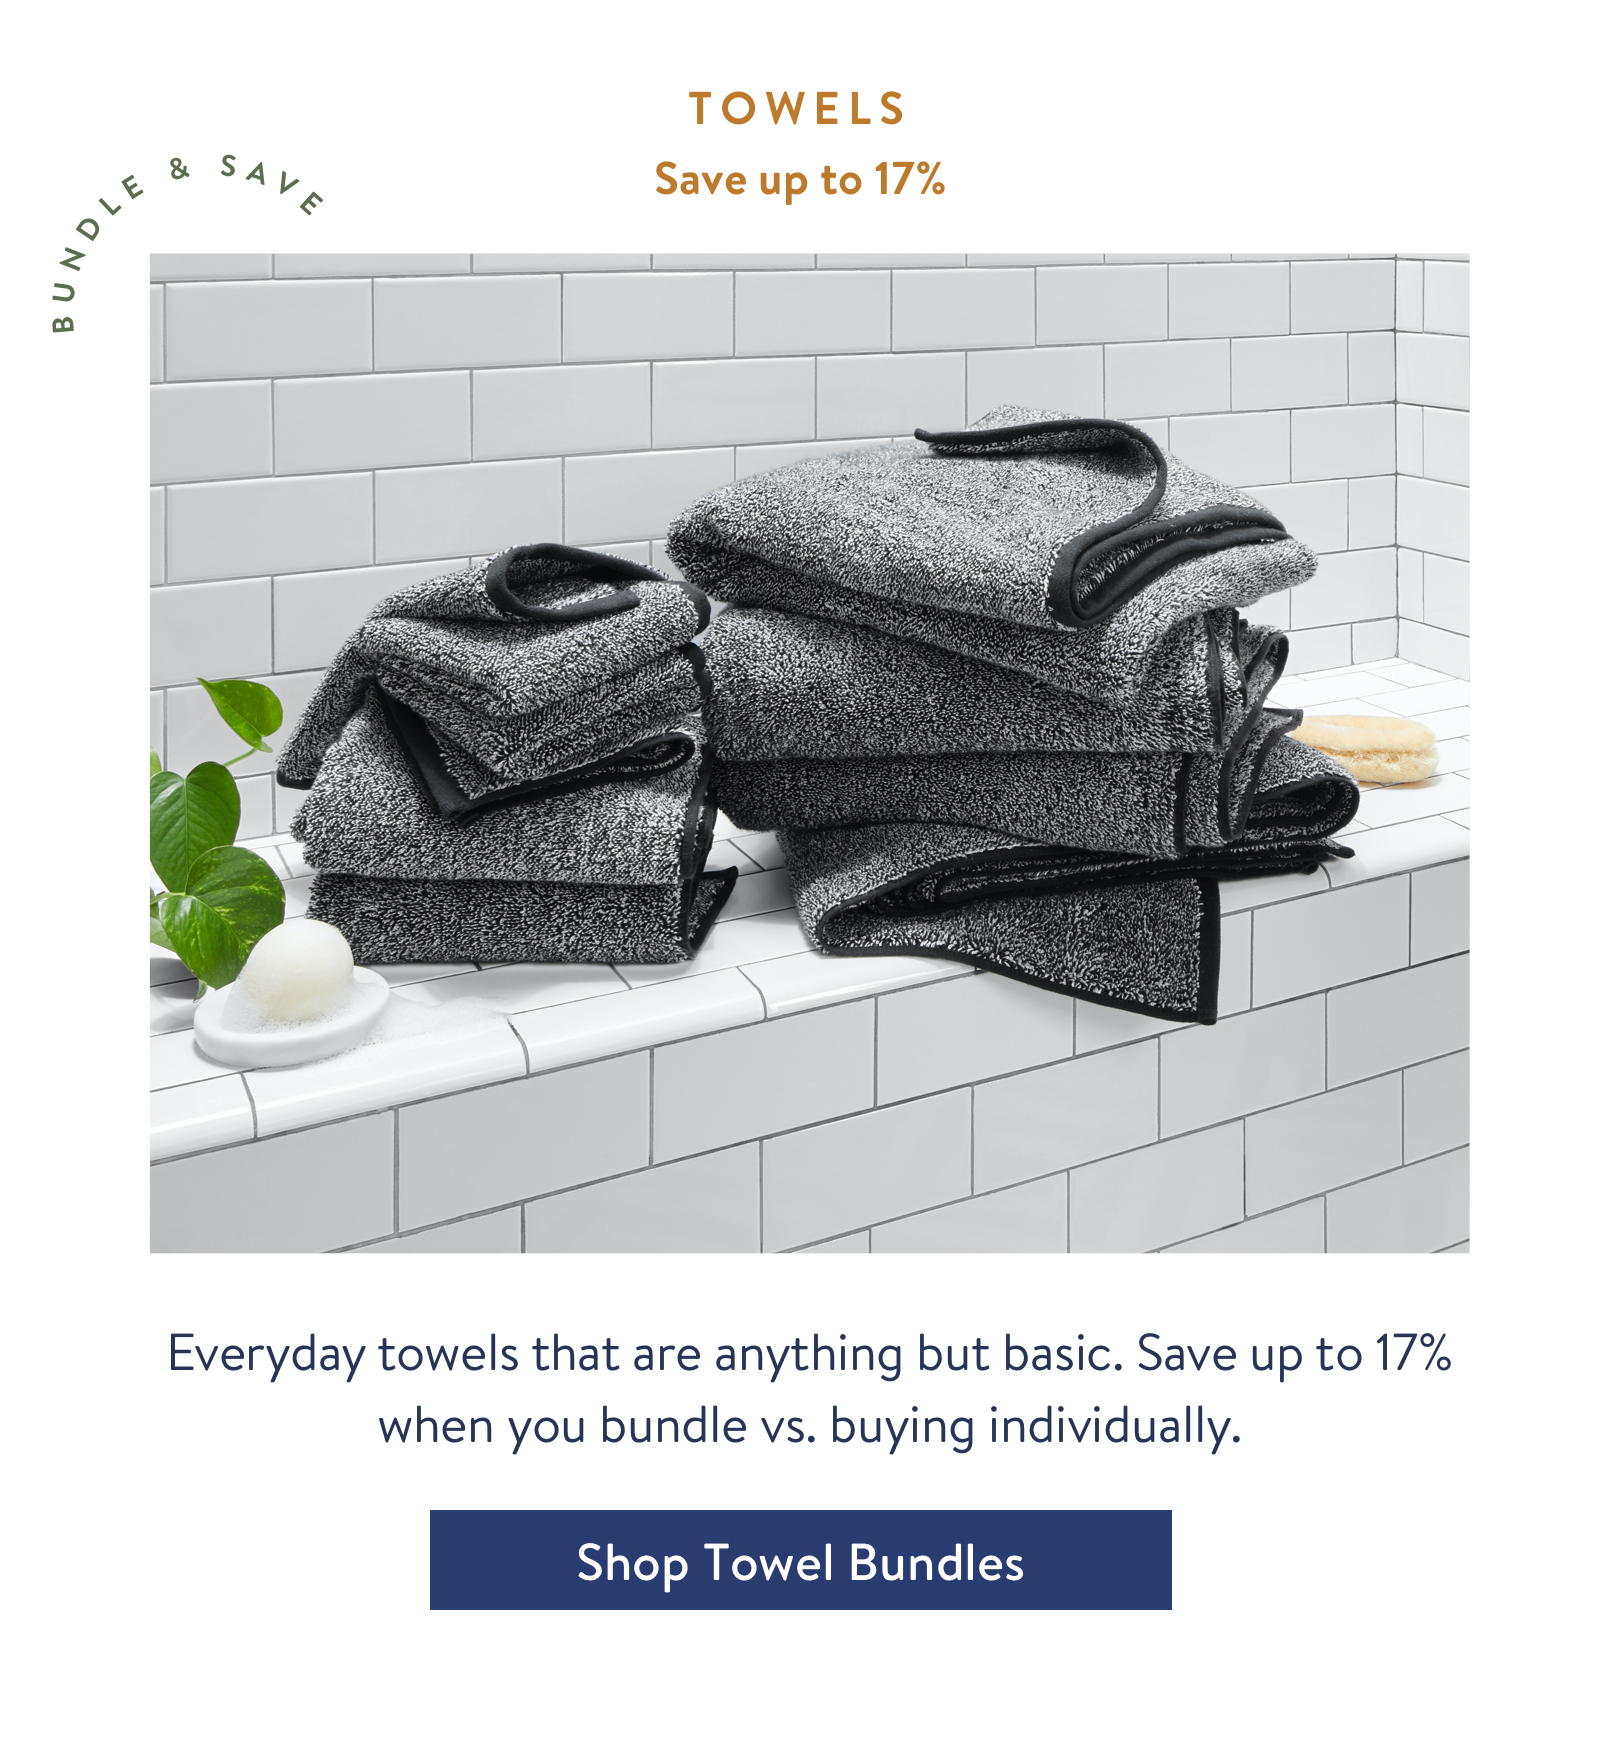 Towel Bundles - Everyday towels that are anything but basic. Save up to 17% when you bundle vs. buying individually.